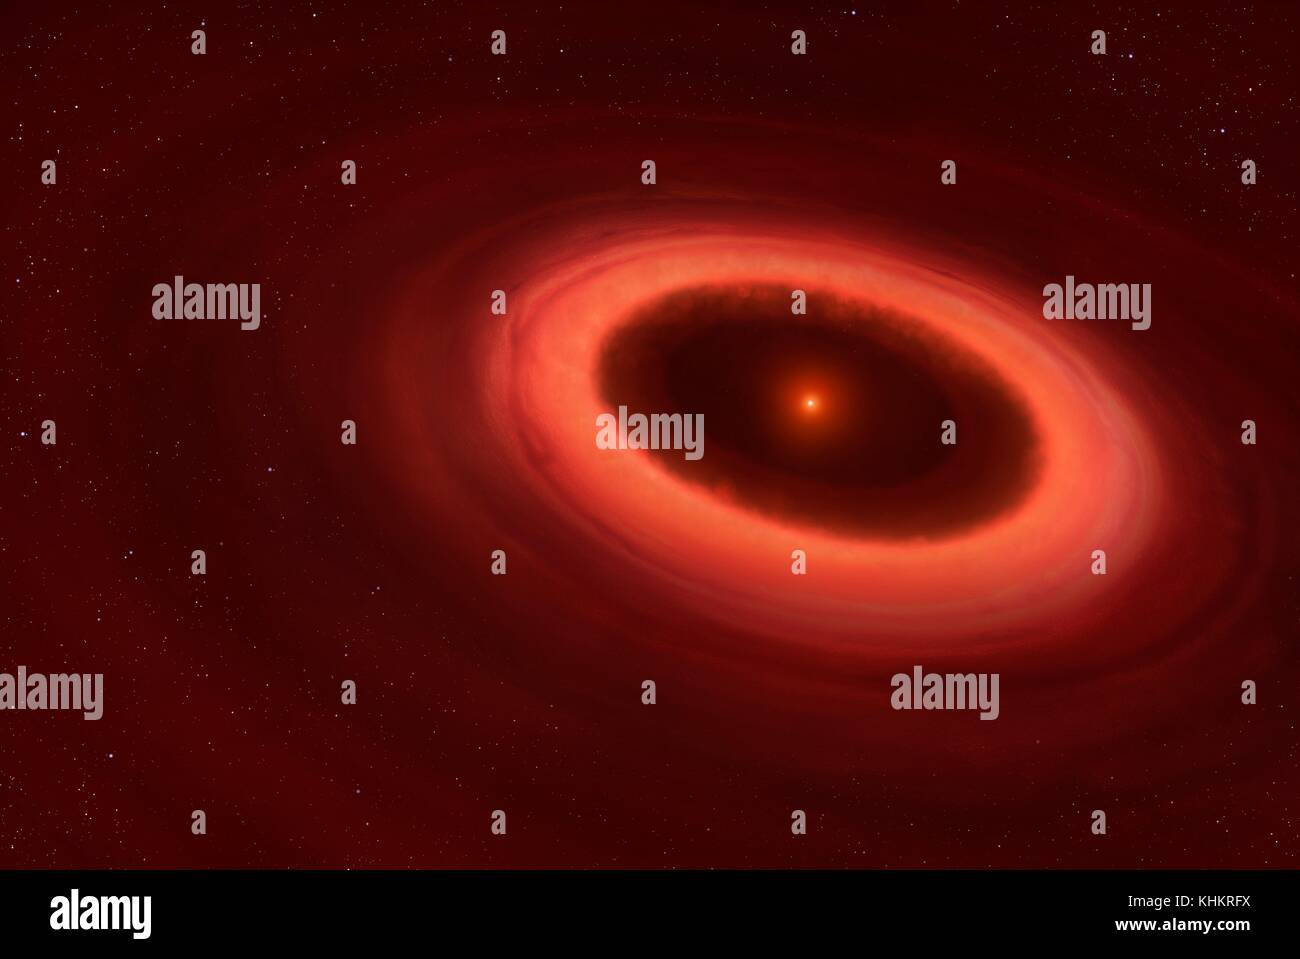 Disc around Proxima Centauri,illustration.The closest star to the Sun,Proxima Centauri,has been found to harbour a belt of dust.Astronomers using the Atacama Large Millimeter/submillimeter Array (ALMA) in Chile detected emissions from a dust belt around the small star.It is similar to the asteroid belt in our own solar system,with particles ranging in size from sub-millimetre dust to asteroids kilometers across.The belt of cool dust is one to four times as far from Proxima Centauri as the Earth is from the sun. Stock Photo